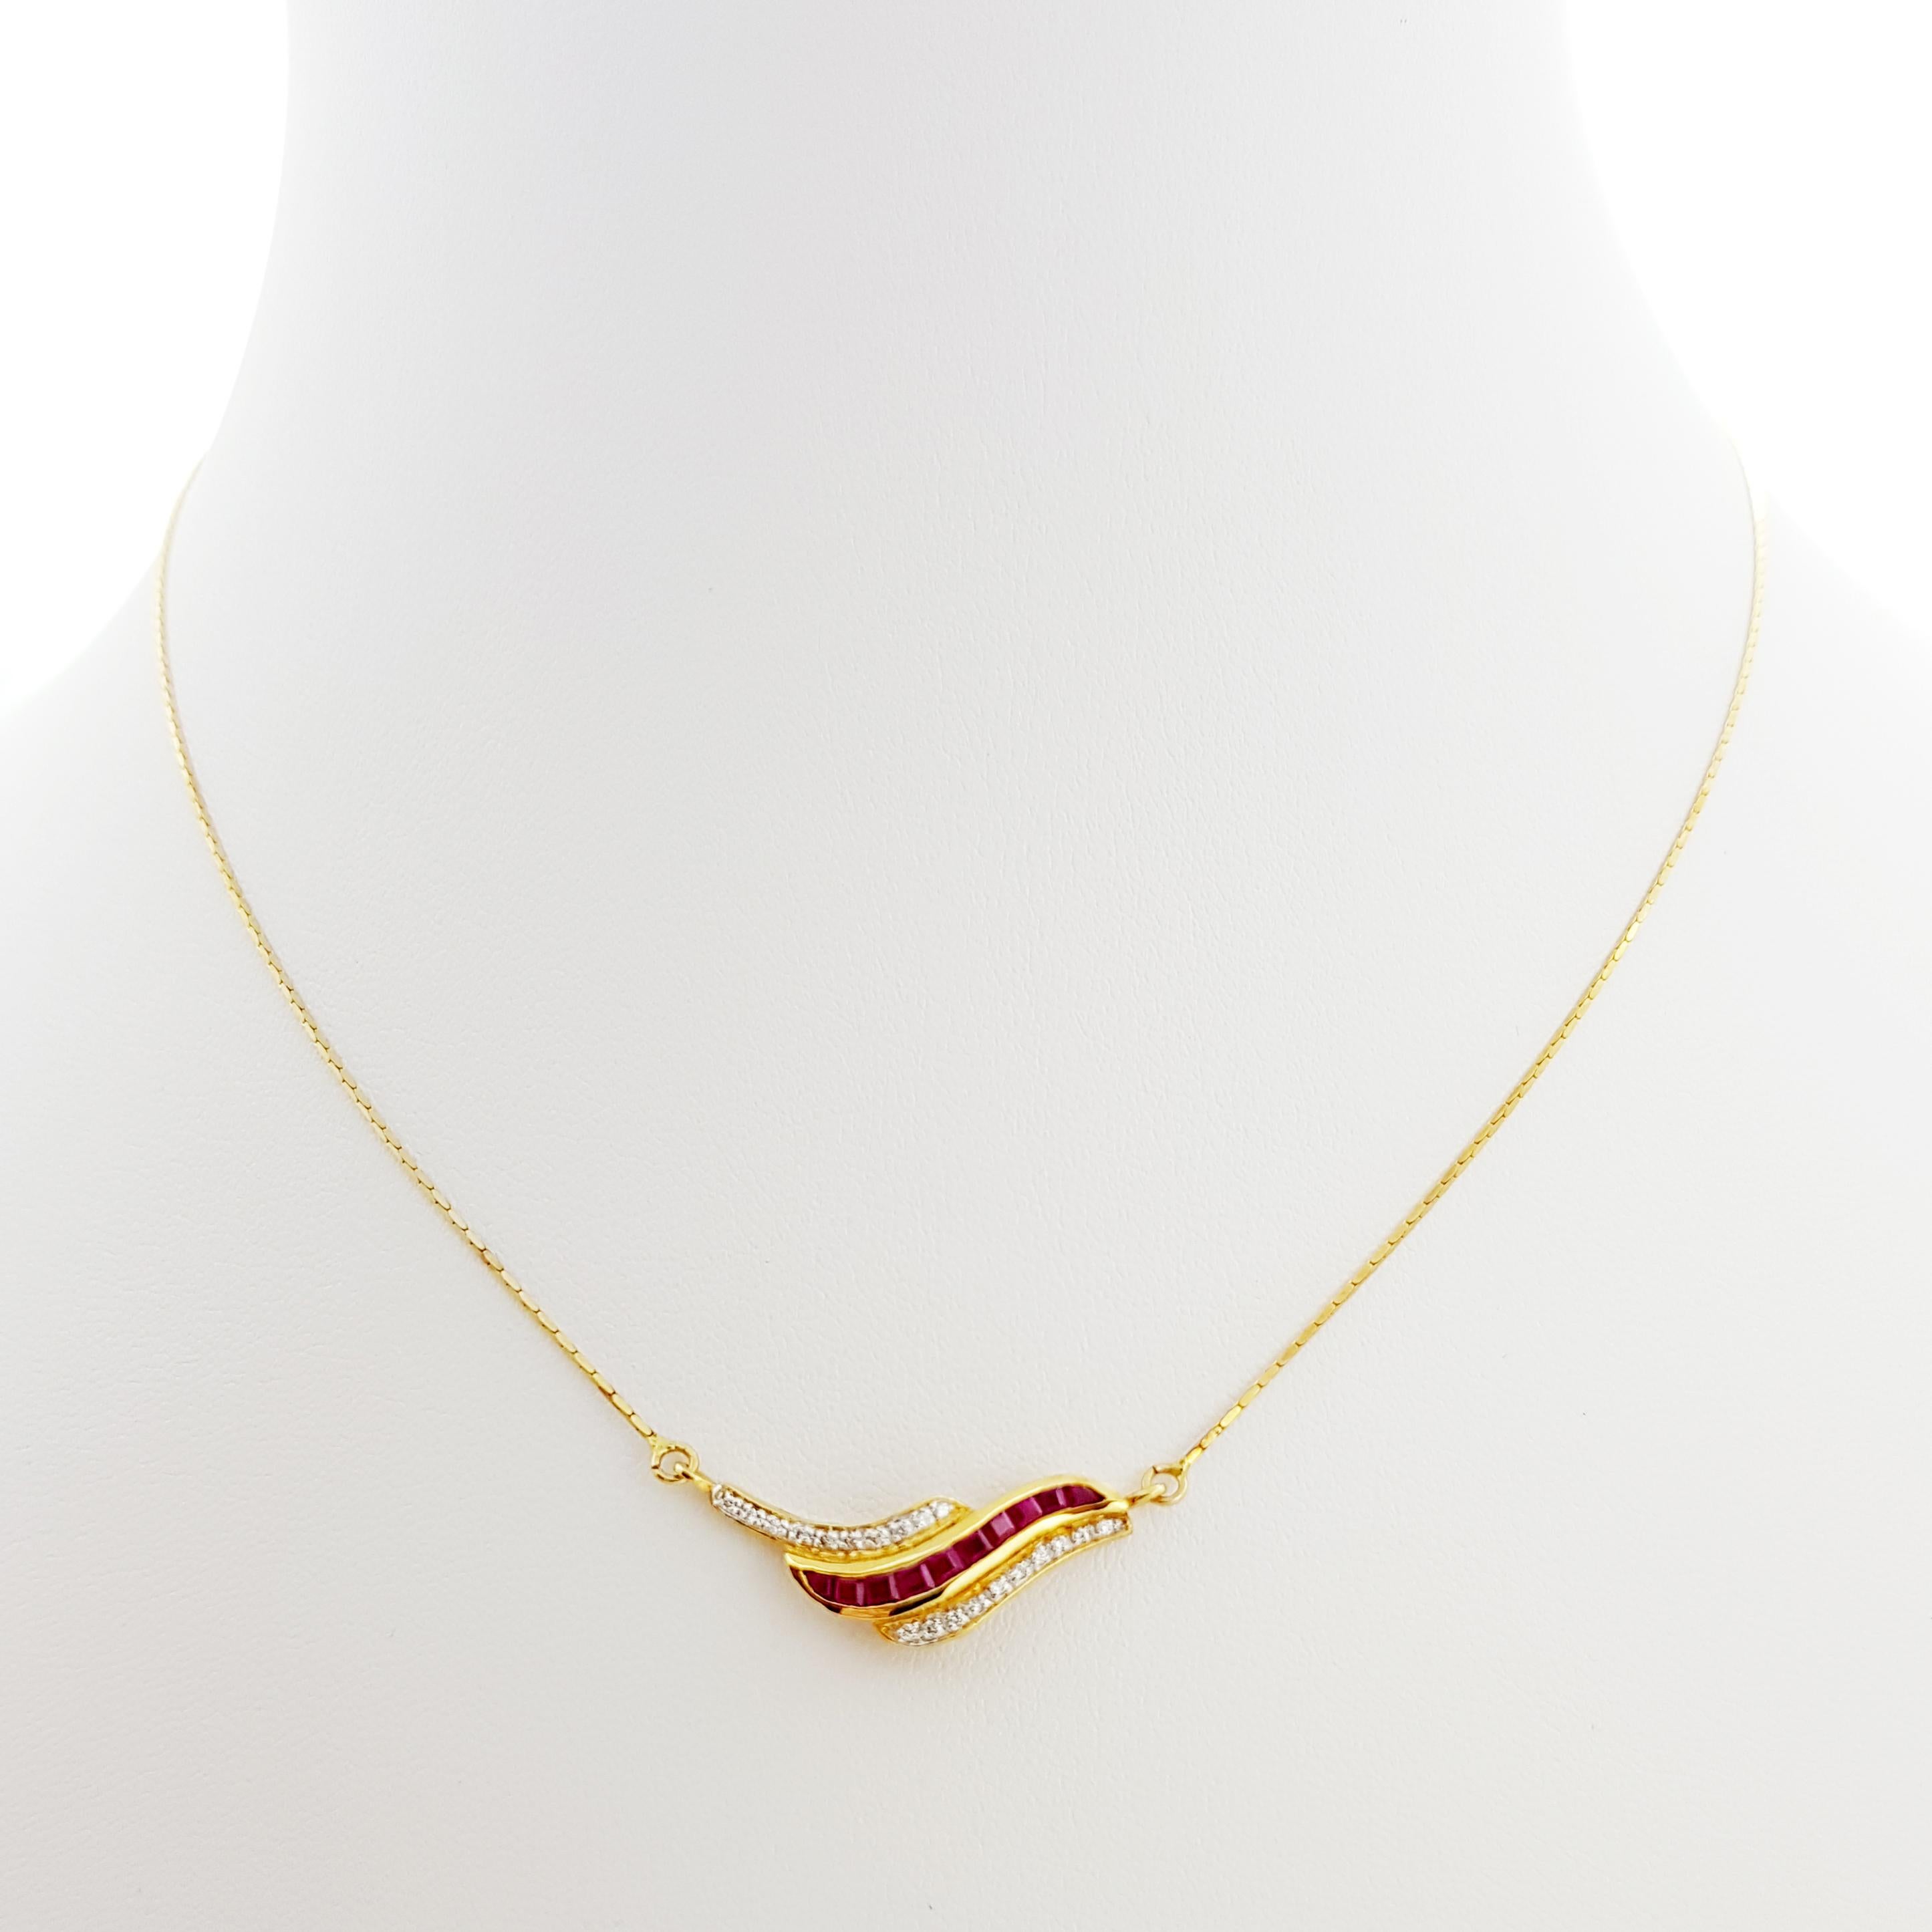 Ruby 0.63 carat with Diamond 0.09 carat Necklace set in 18 Karat Gold Settings

Width: 0.9 cm 
Length: 43.5 cm
Total Weight: 4.22 grams

